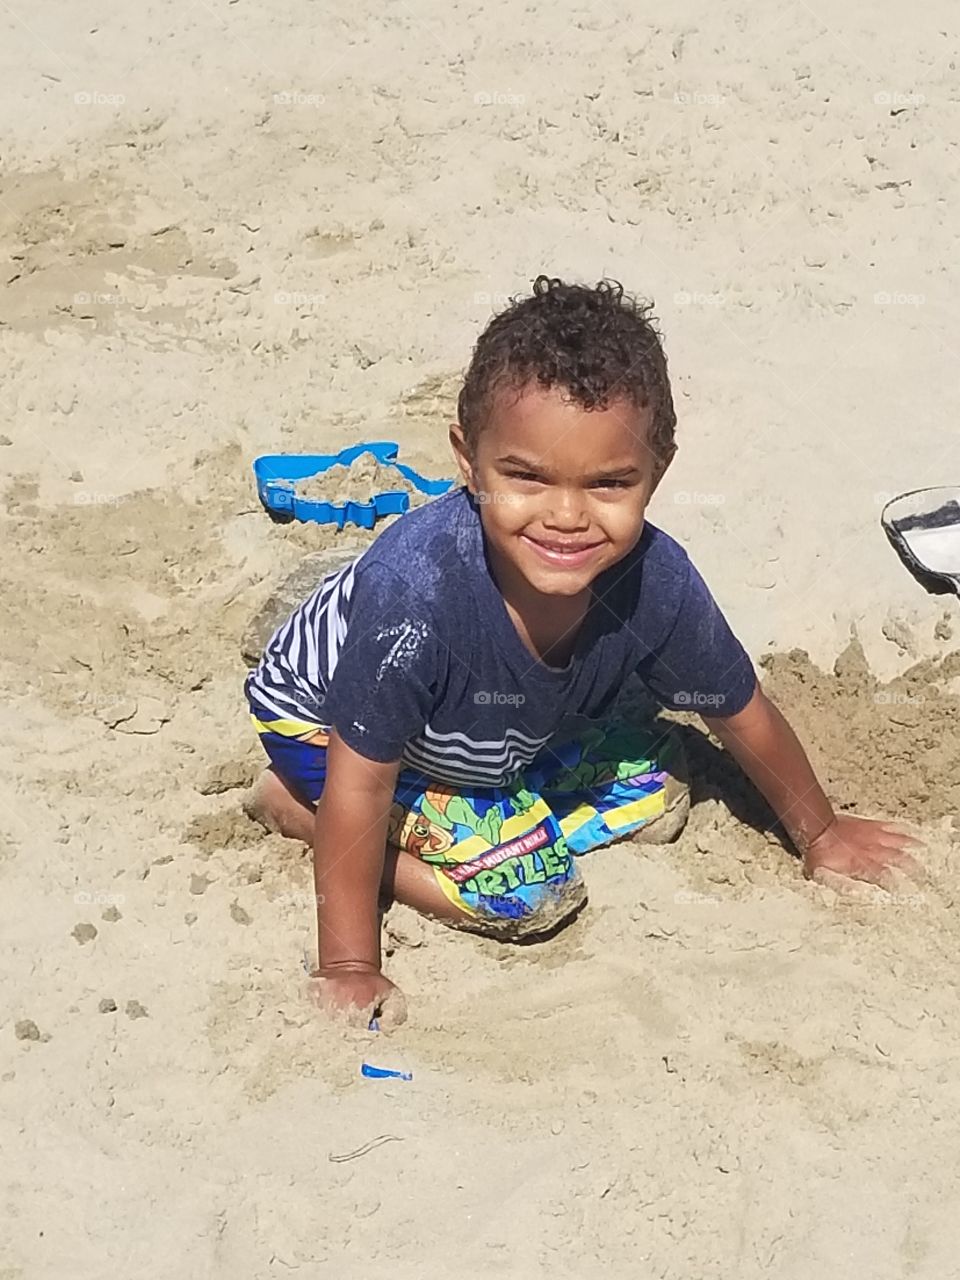 beach ⛱️ love to Play in the Sand